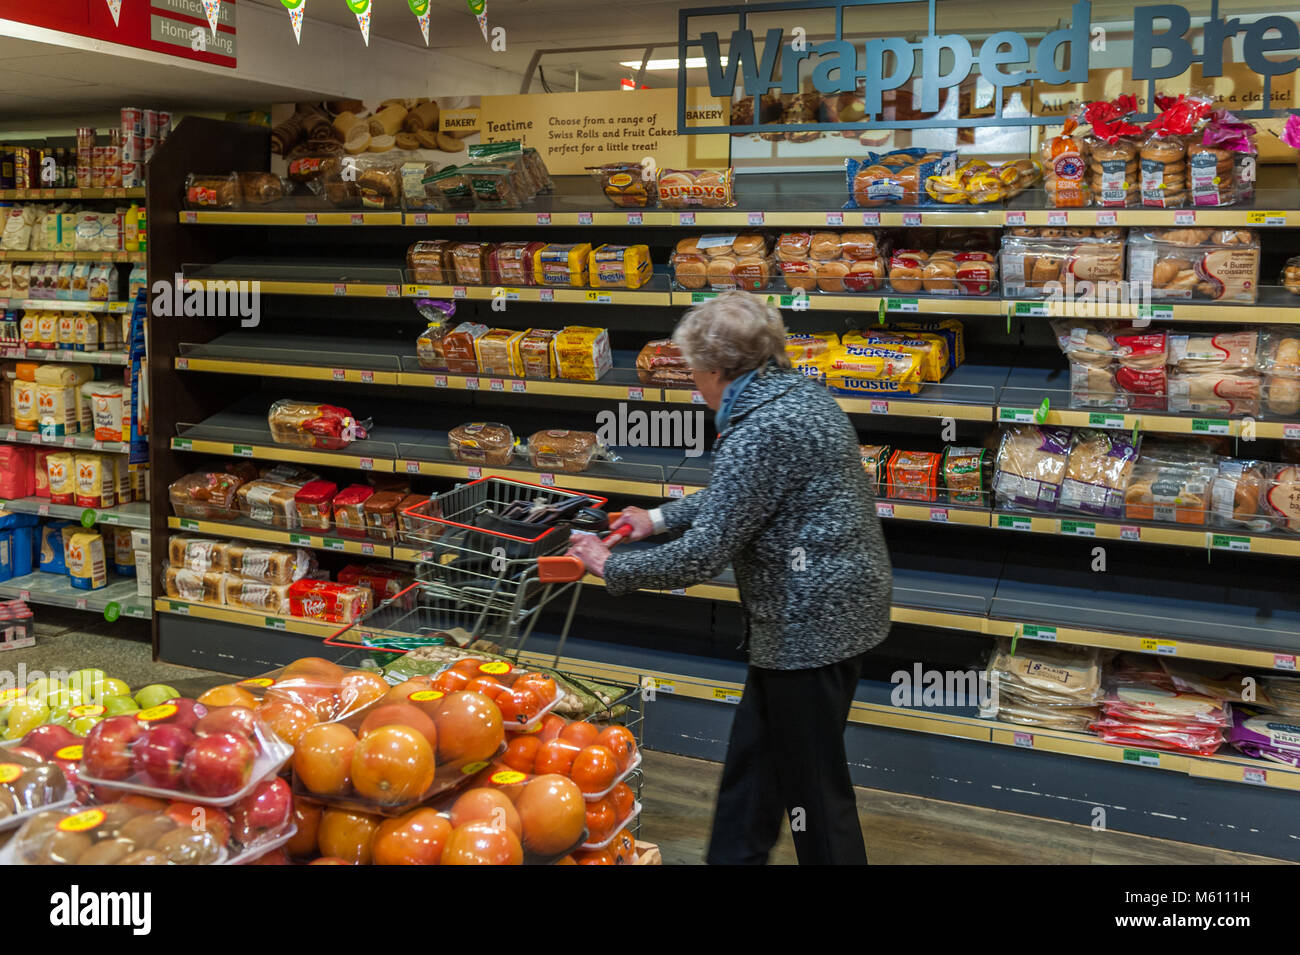 Dunmanway, County Cork, Ireland. 27th Feb, 2018. Ahead of the looming 'Beast from the East'/Storm Emma weather event, people have been panic buying supermarket goods. The bread shelves in Supervalu, Dunmanway were stripped today but more deliveries are expected tomorrow before the storm hits. Credit: Andy Gibson/Alamy Live News. Stock Photo